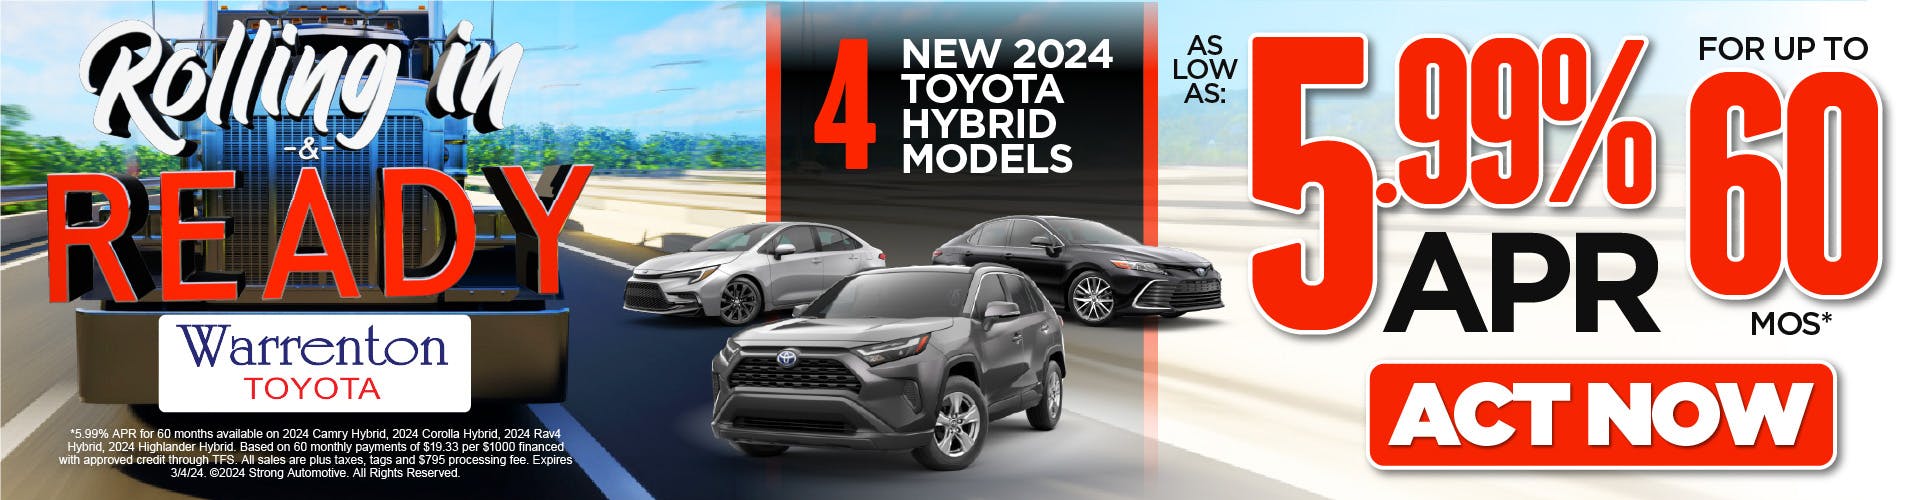 5.99% APR up to 60 Months* on 4 NEW 2024 Toyota Hybrid Models!